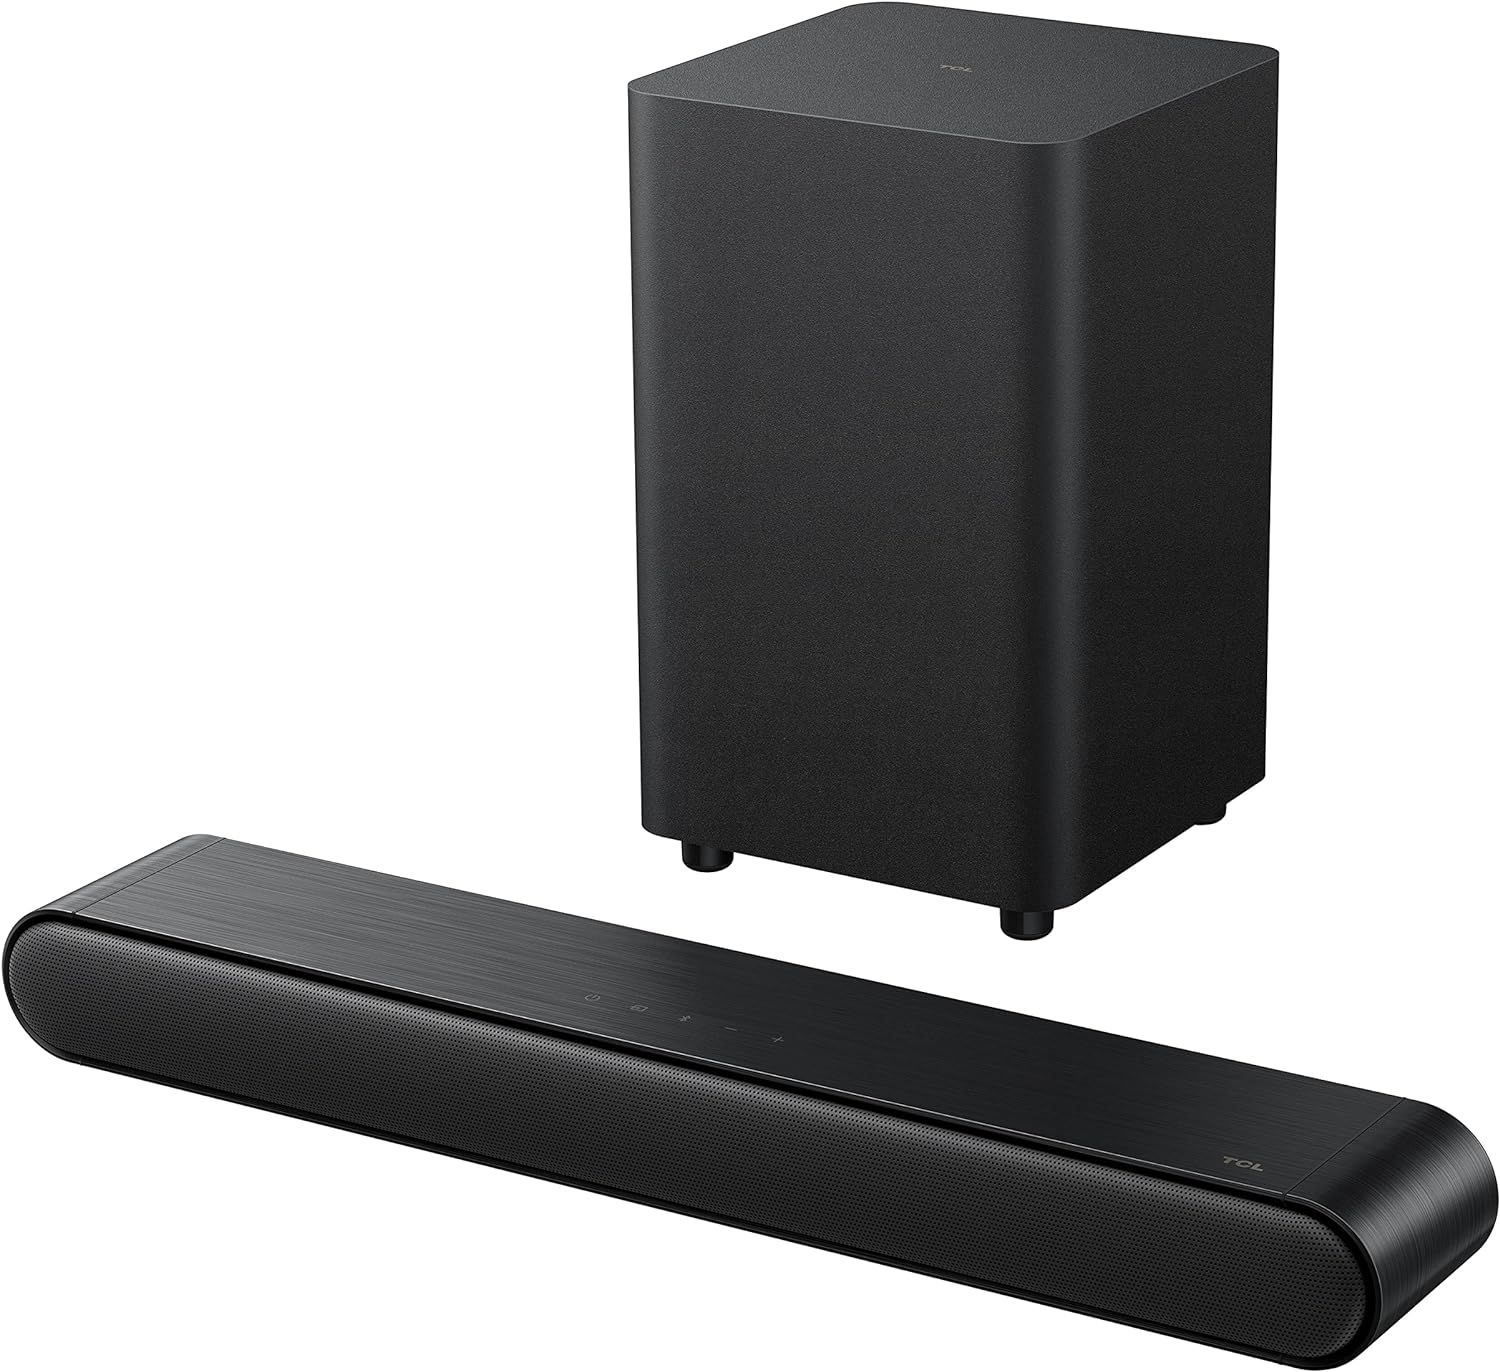 TCL Sound Bar Review